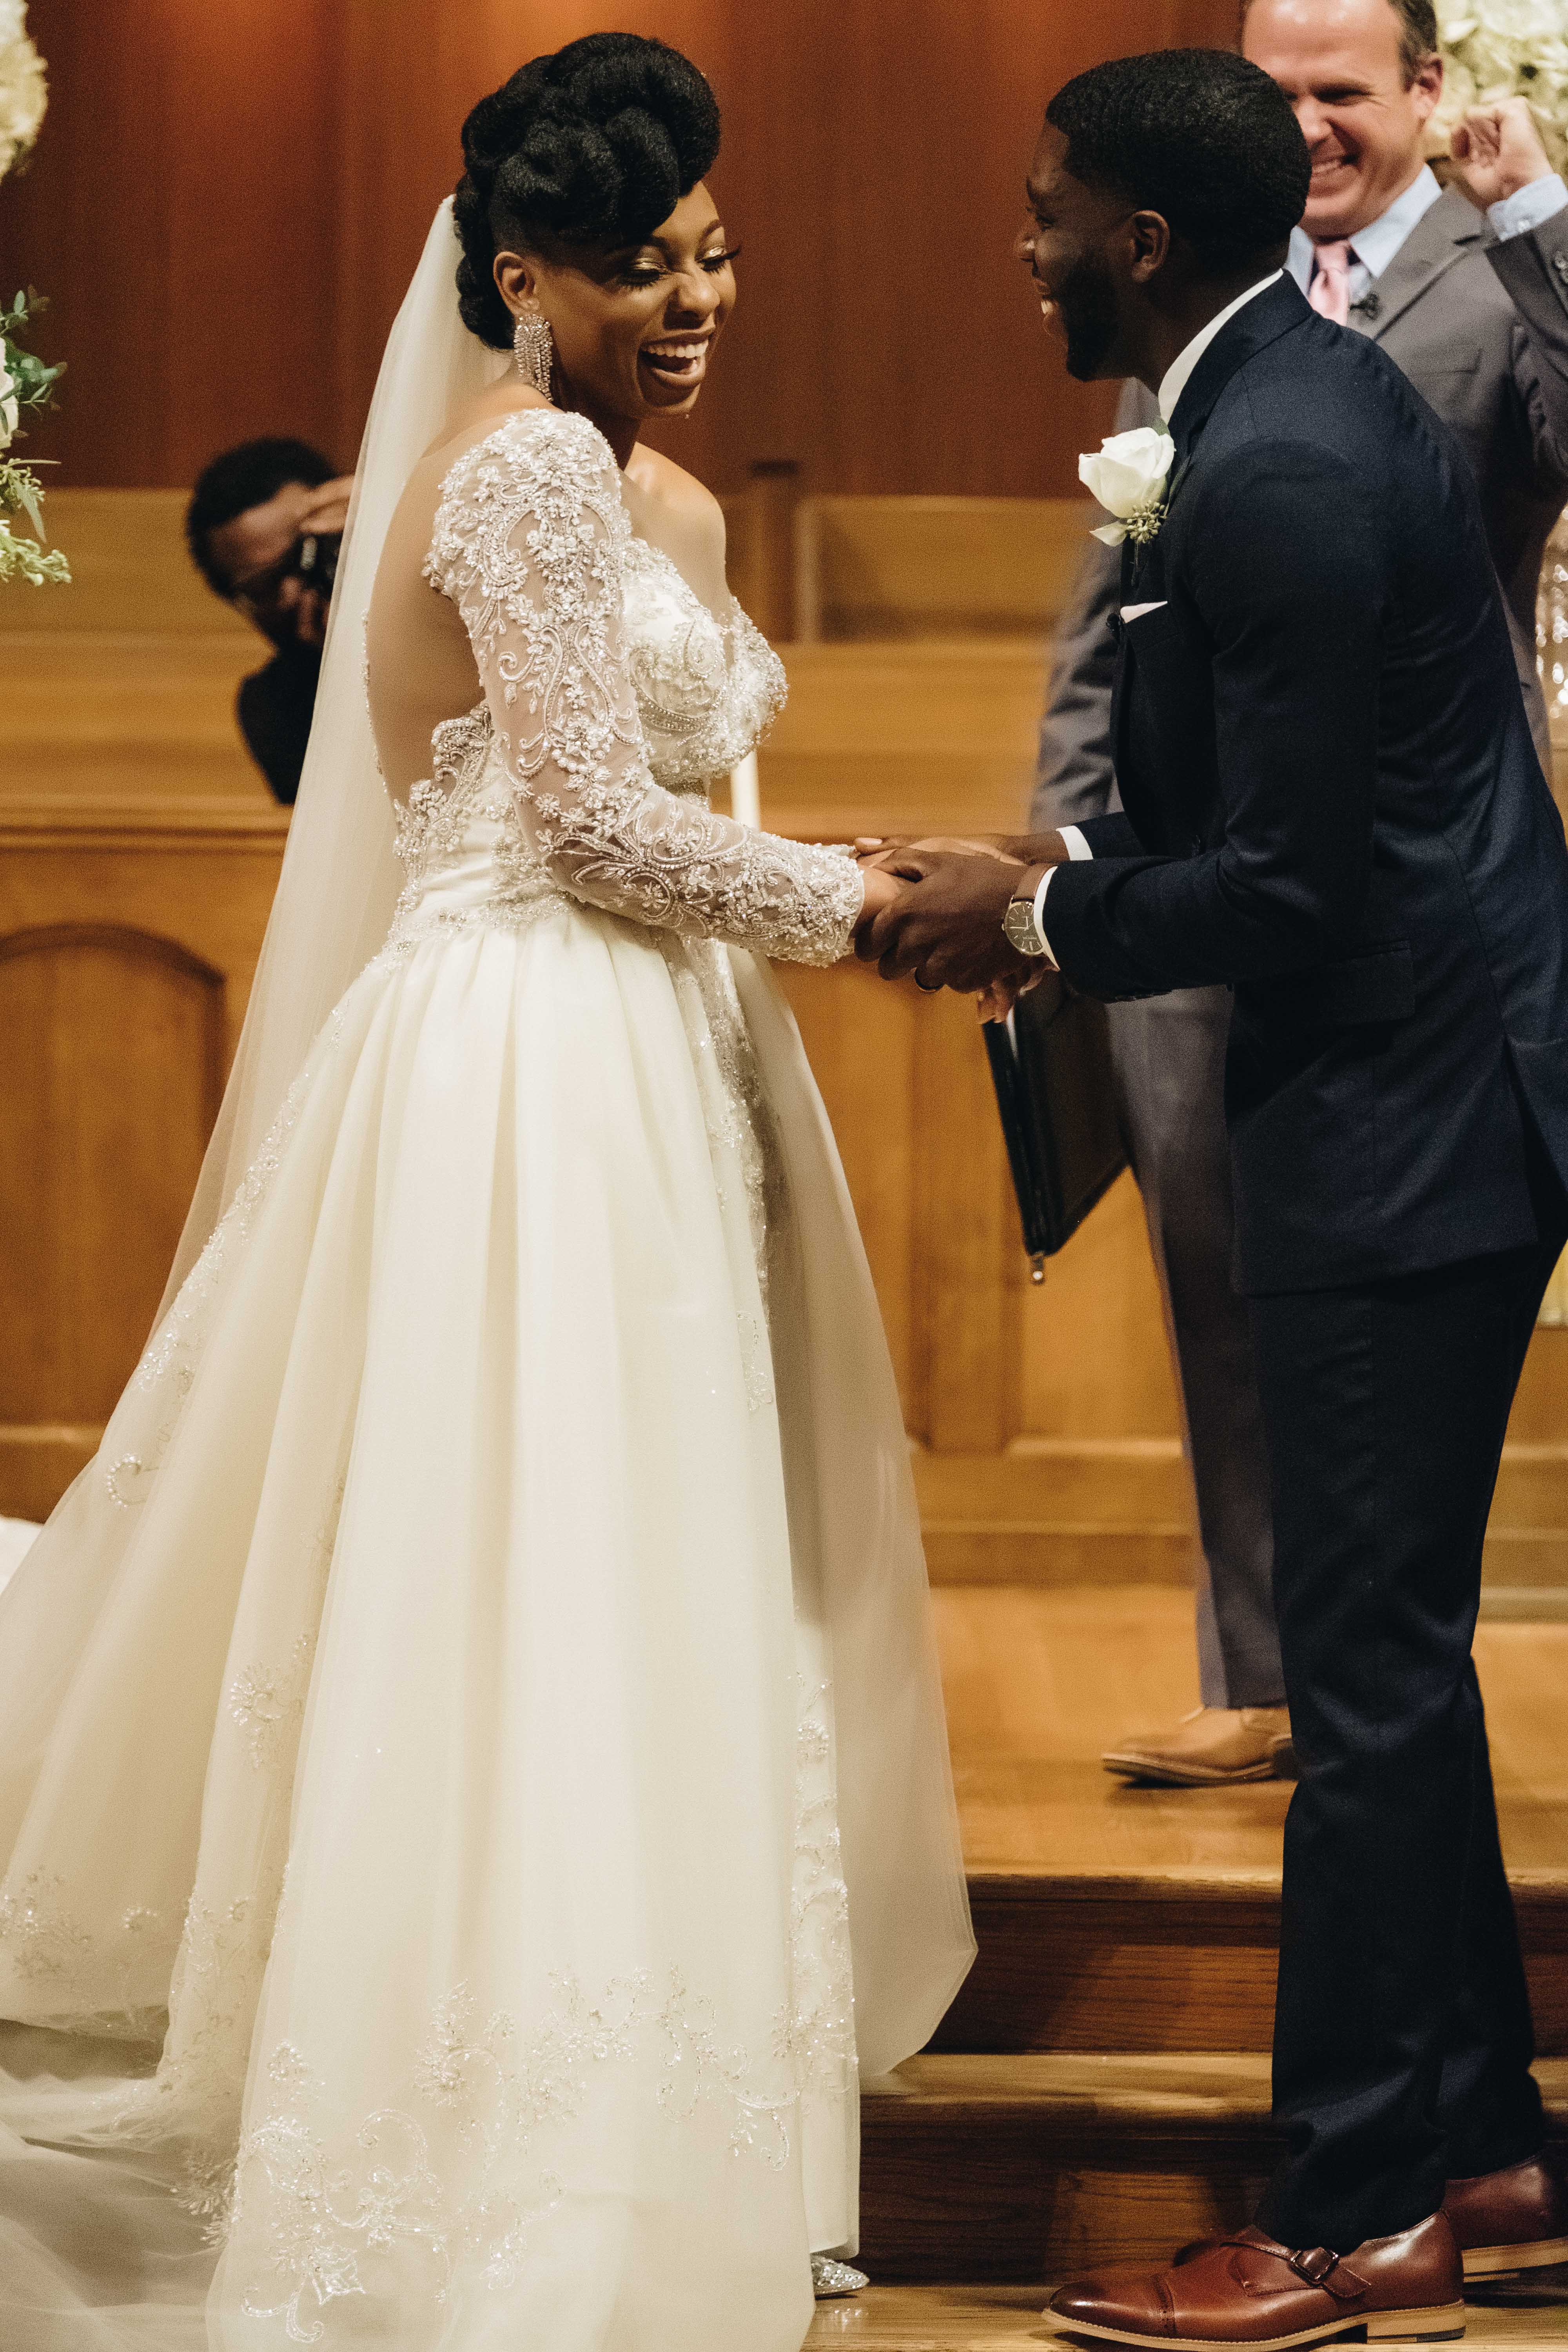 Bridal Bliss: Crystal and Olayinka's Wedding Overflowed With Tradition and Love